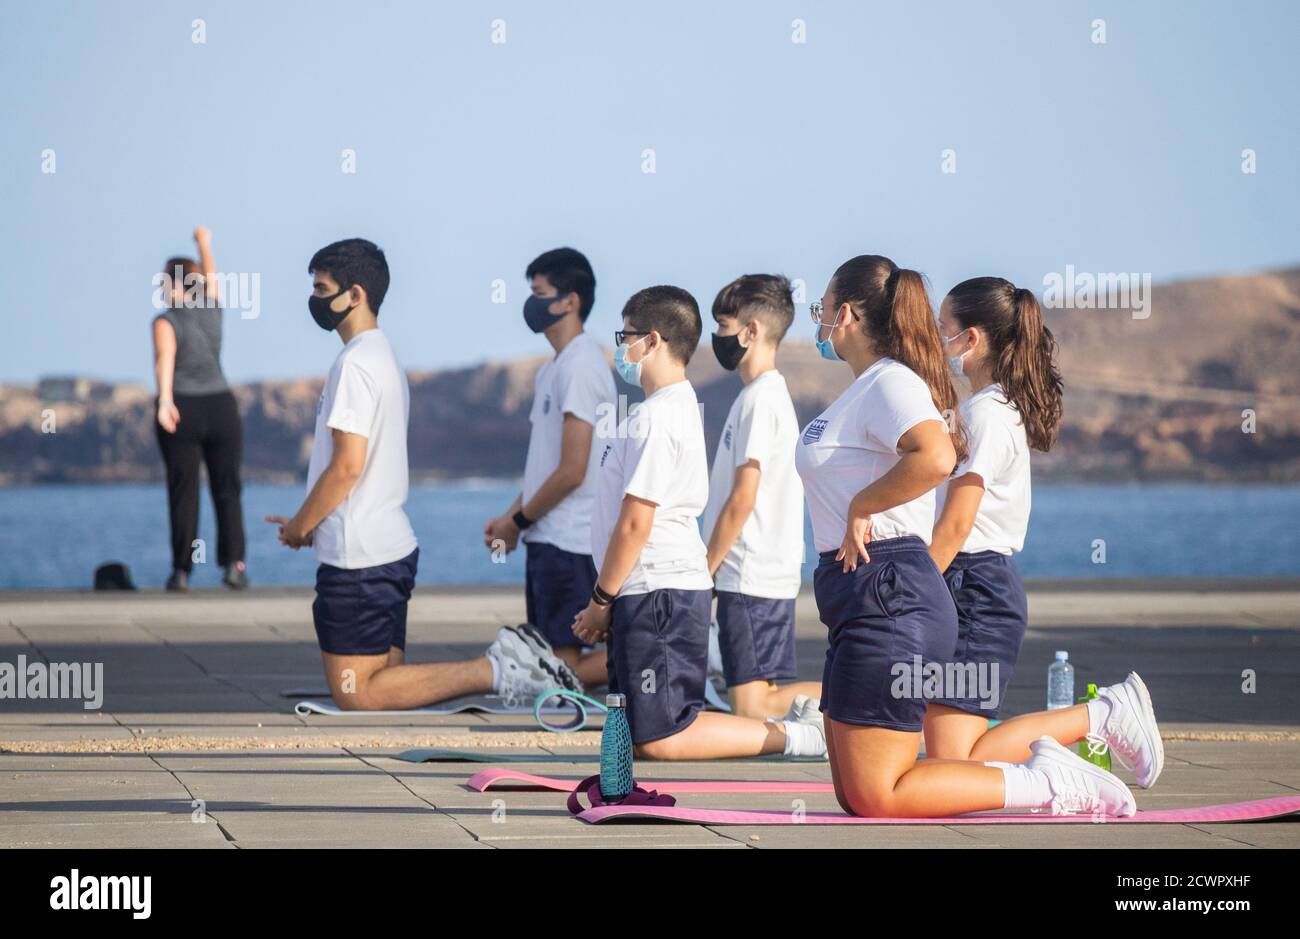 Las Palmas, Gran Canaria, Canary Islands, Spain. 30th September, 2020.  Schoolchildren wearing face coverings during outdoor Yoga session in Las Palmas on Gran Canaria. Credit: Alan Dawson/Alamy Live News Stock Photo